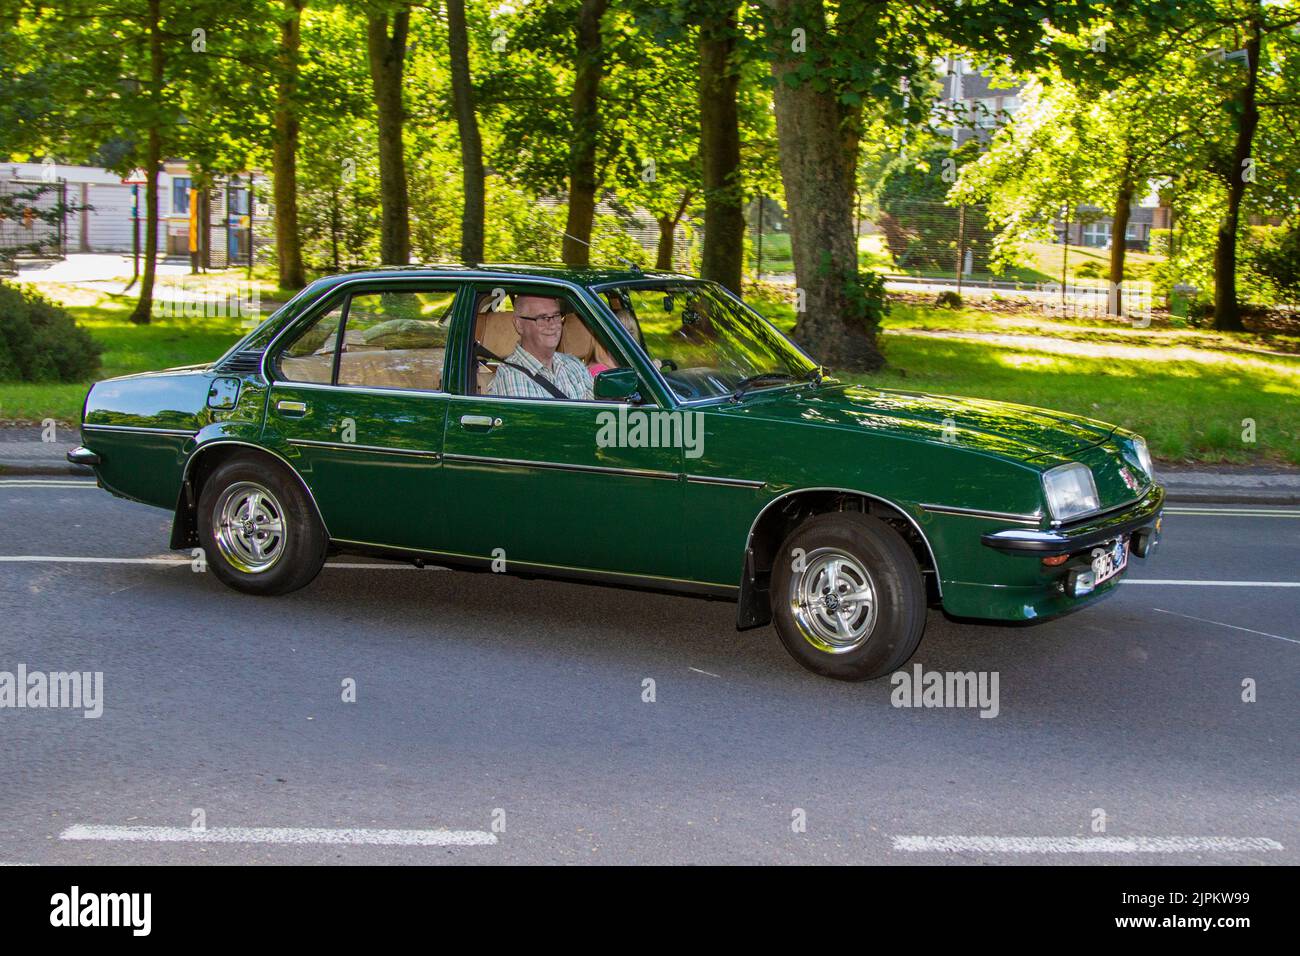 70s seventies Green Vauxhall Cavalier 4dr British classic car arriving at The annual Stanley Park Classic Car Show in the Italian Gardens. Stanley Park classics yesteryear Motor Show Hosted By Blackpool Vintage Vehicle Preservation Group, UK. Stock Photo